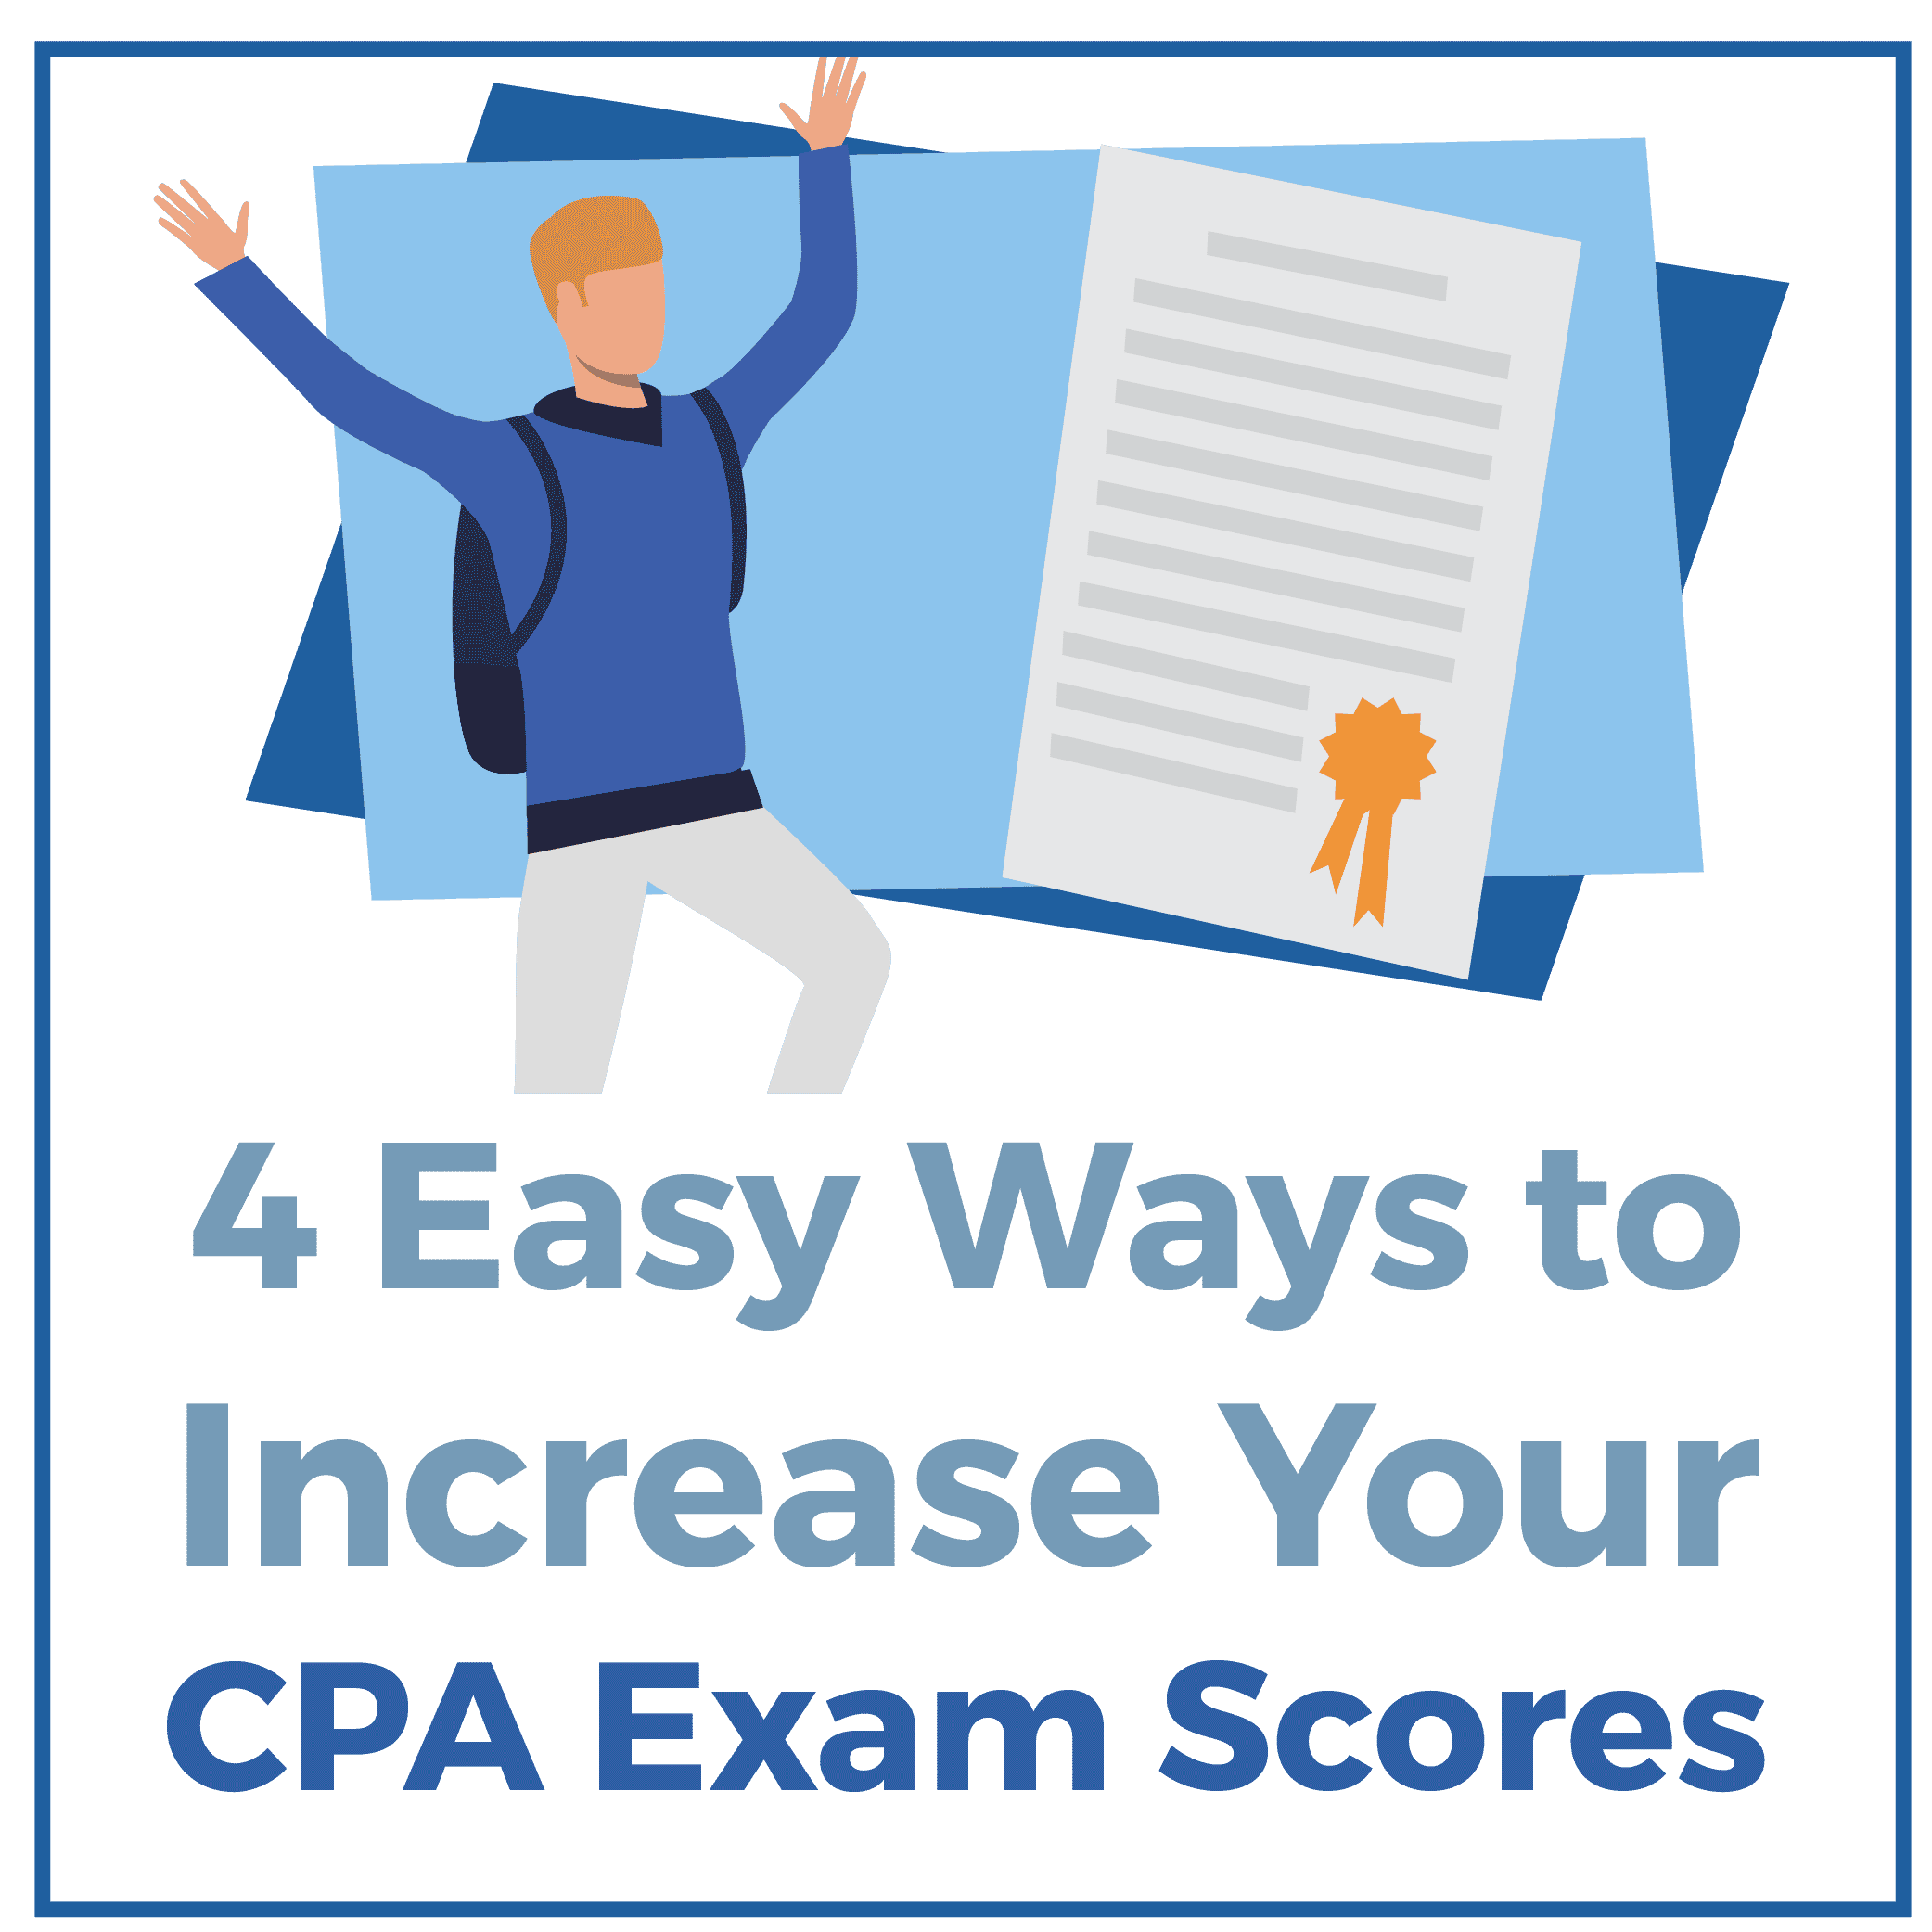 4 Easy Ways to Increase Your CPA Exam Scores